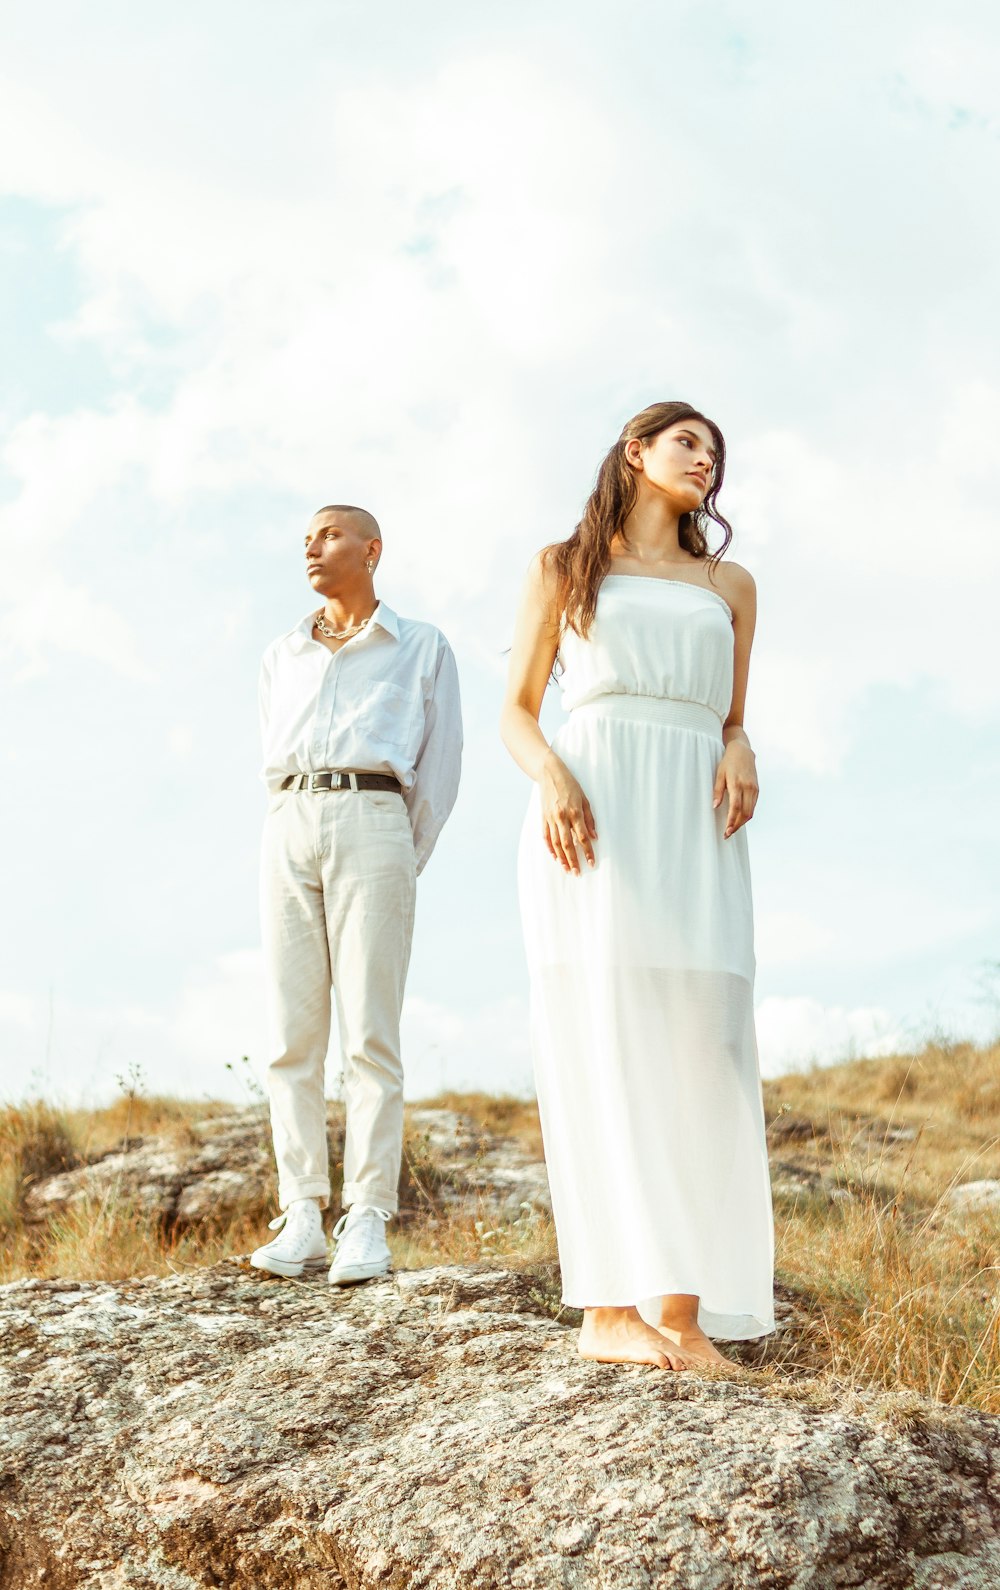 man in white dress shirt and woman in white dress standing on brown grass field during